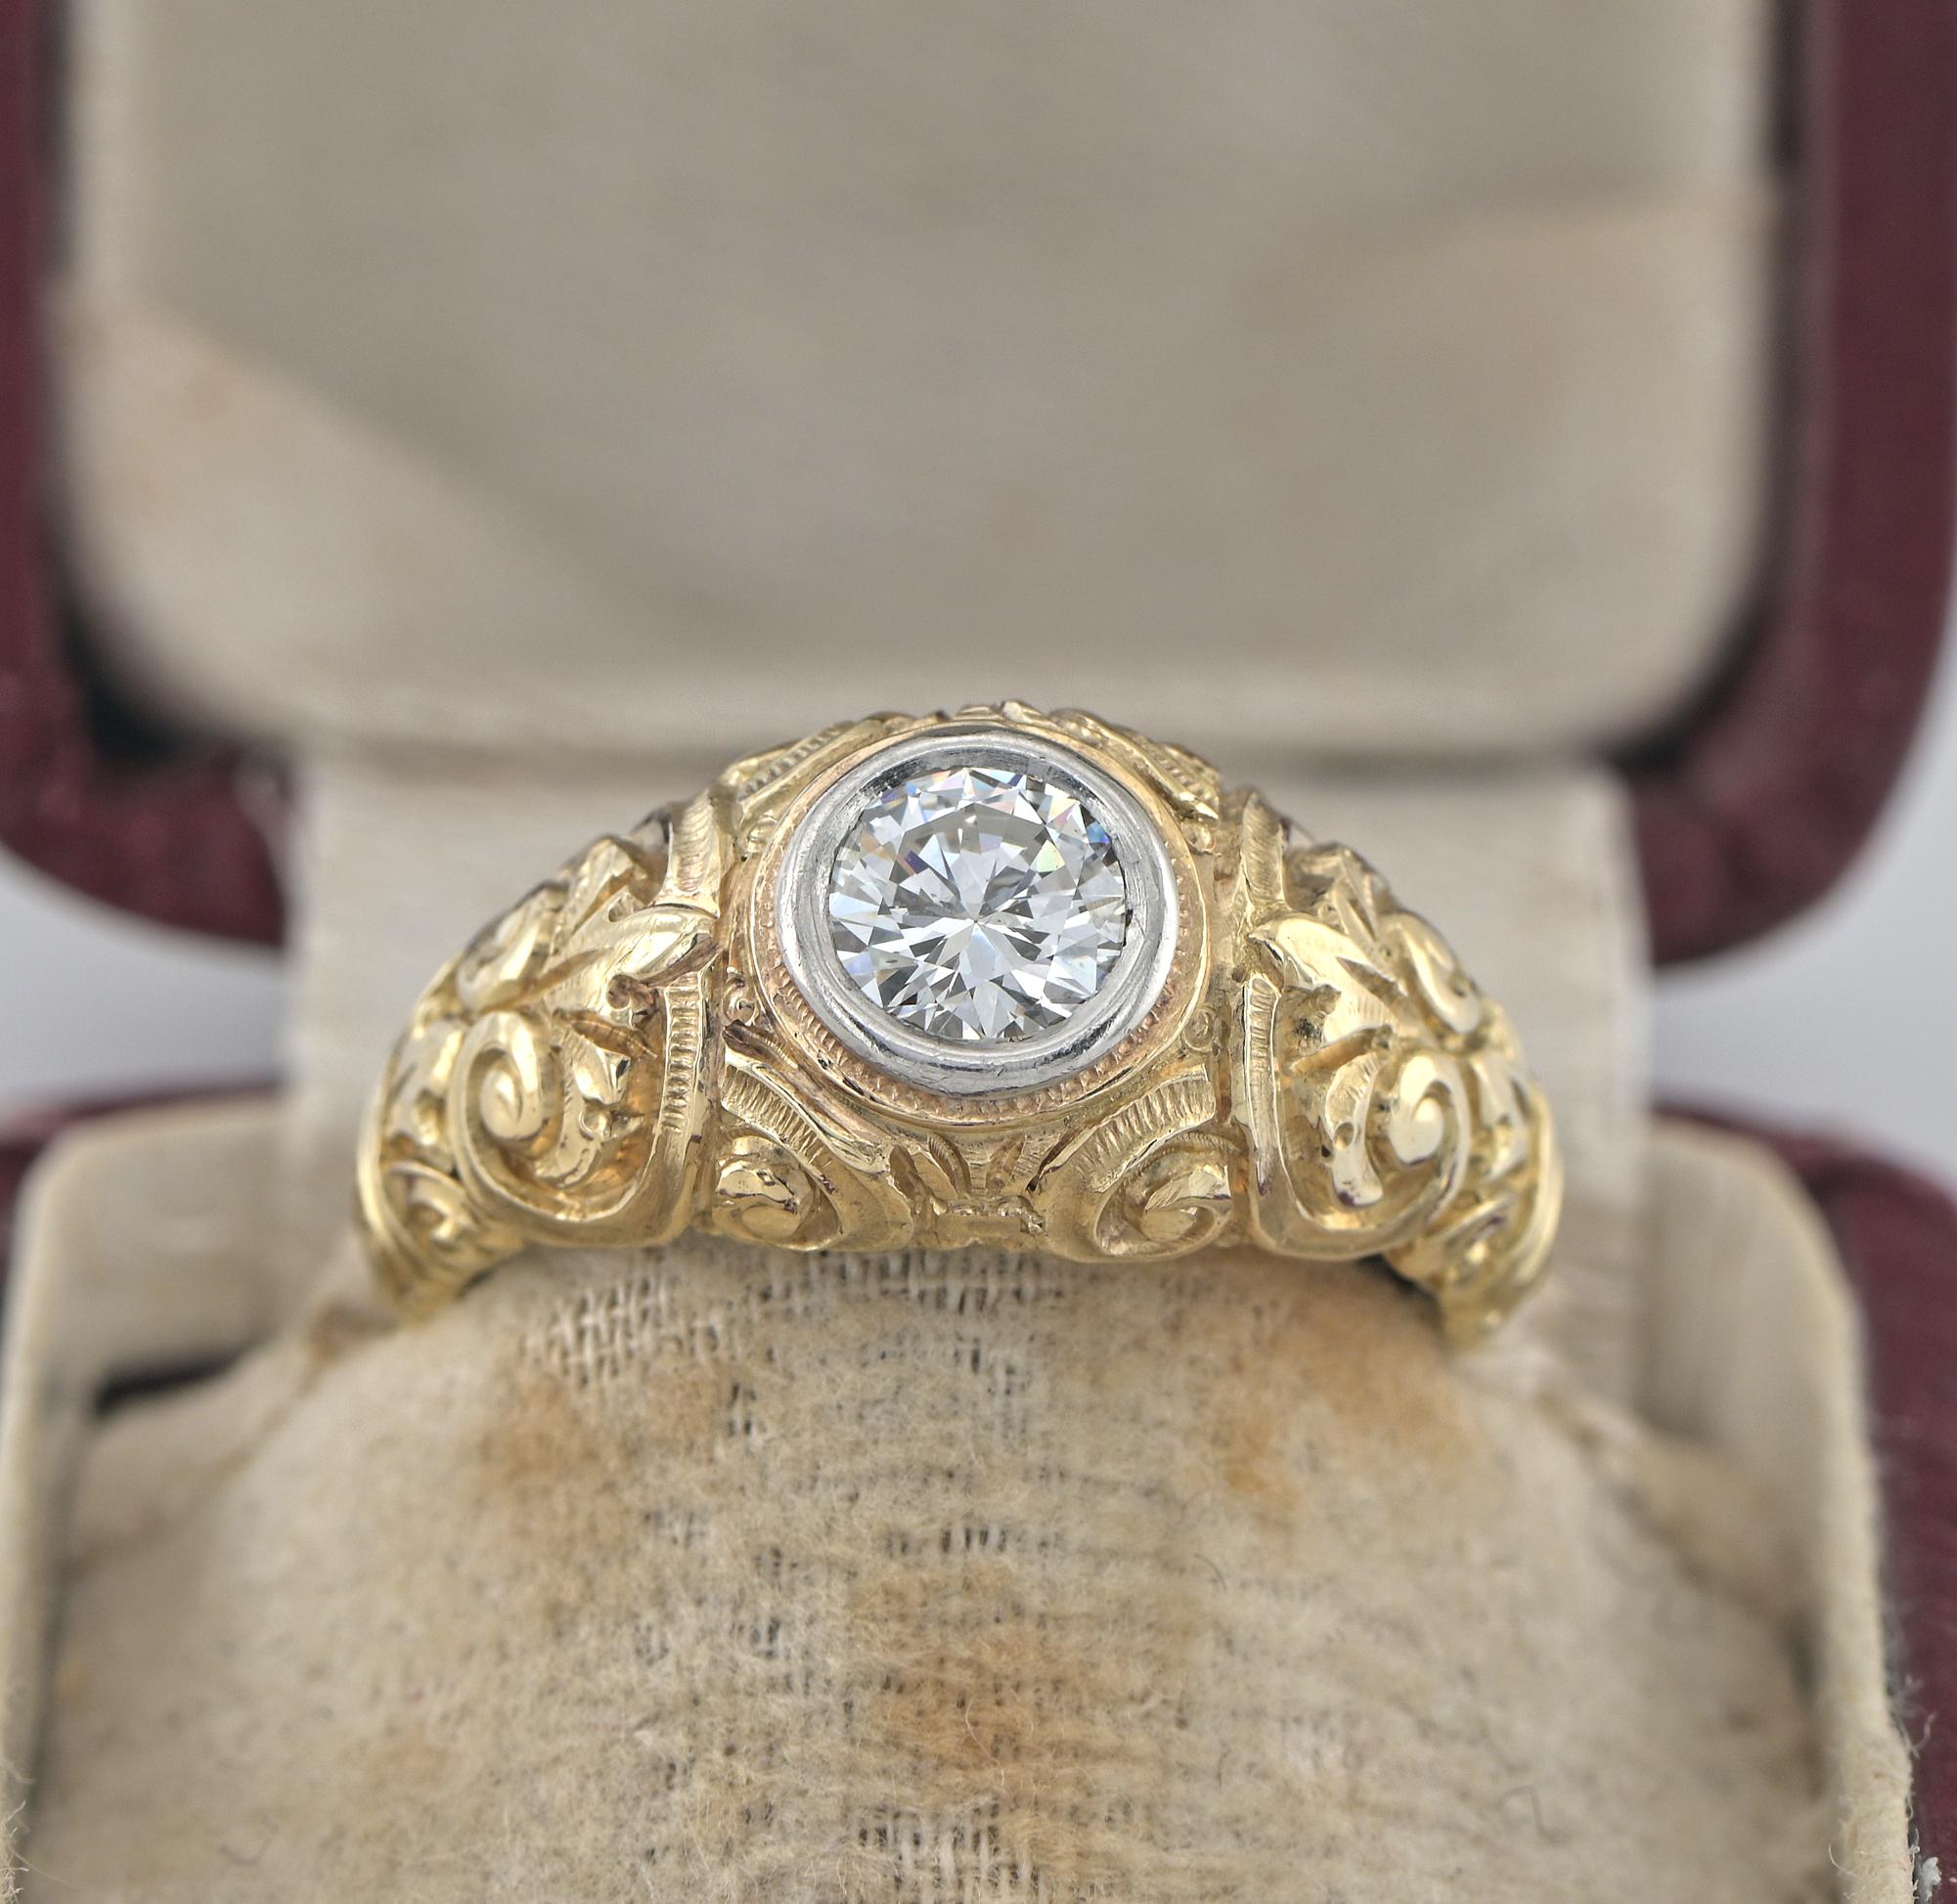 Past Remembrance
Outstanding Edwardian period Diamond solitaire ring
Reminiscent of the Victorian period boasts stunning workmanship of the glorious Edwardian era, totally hand made with heavy solid 18 Kt gold mount artful and richly deep carved